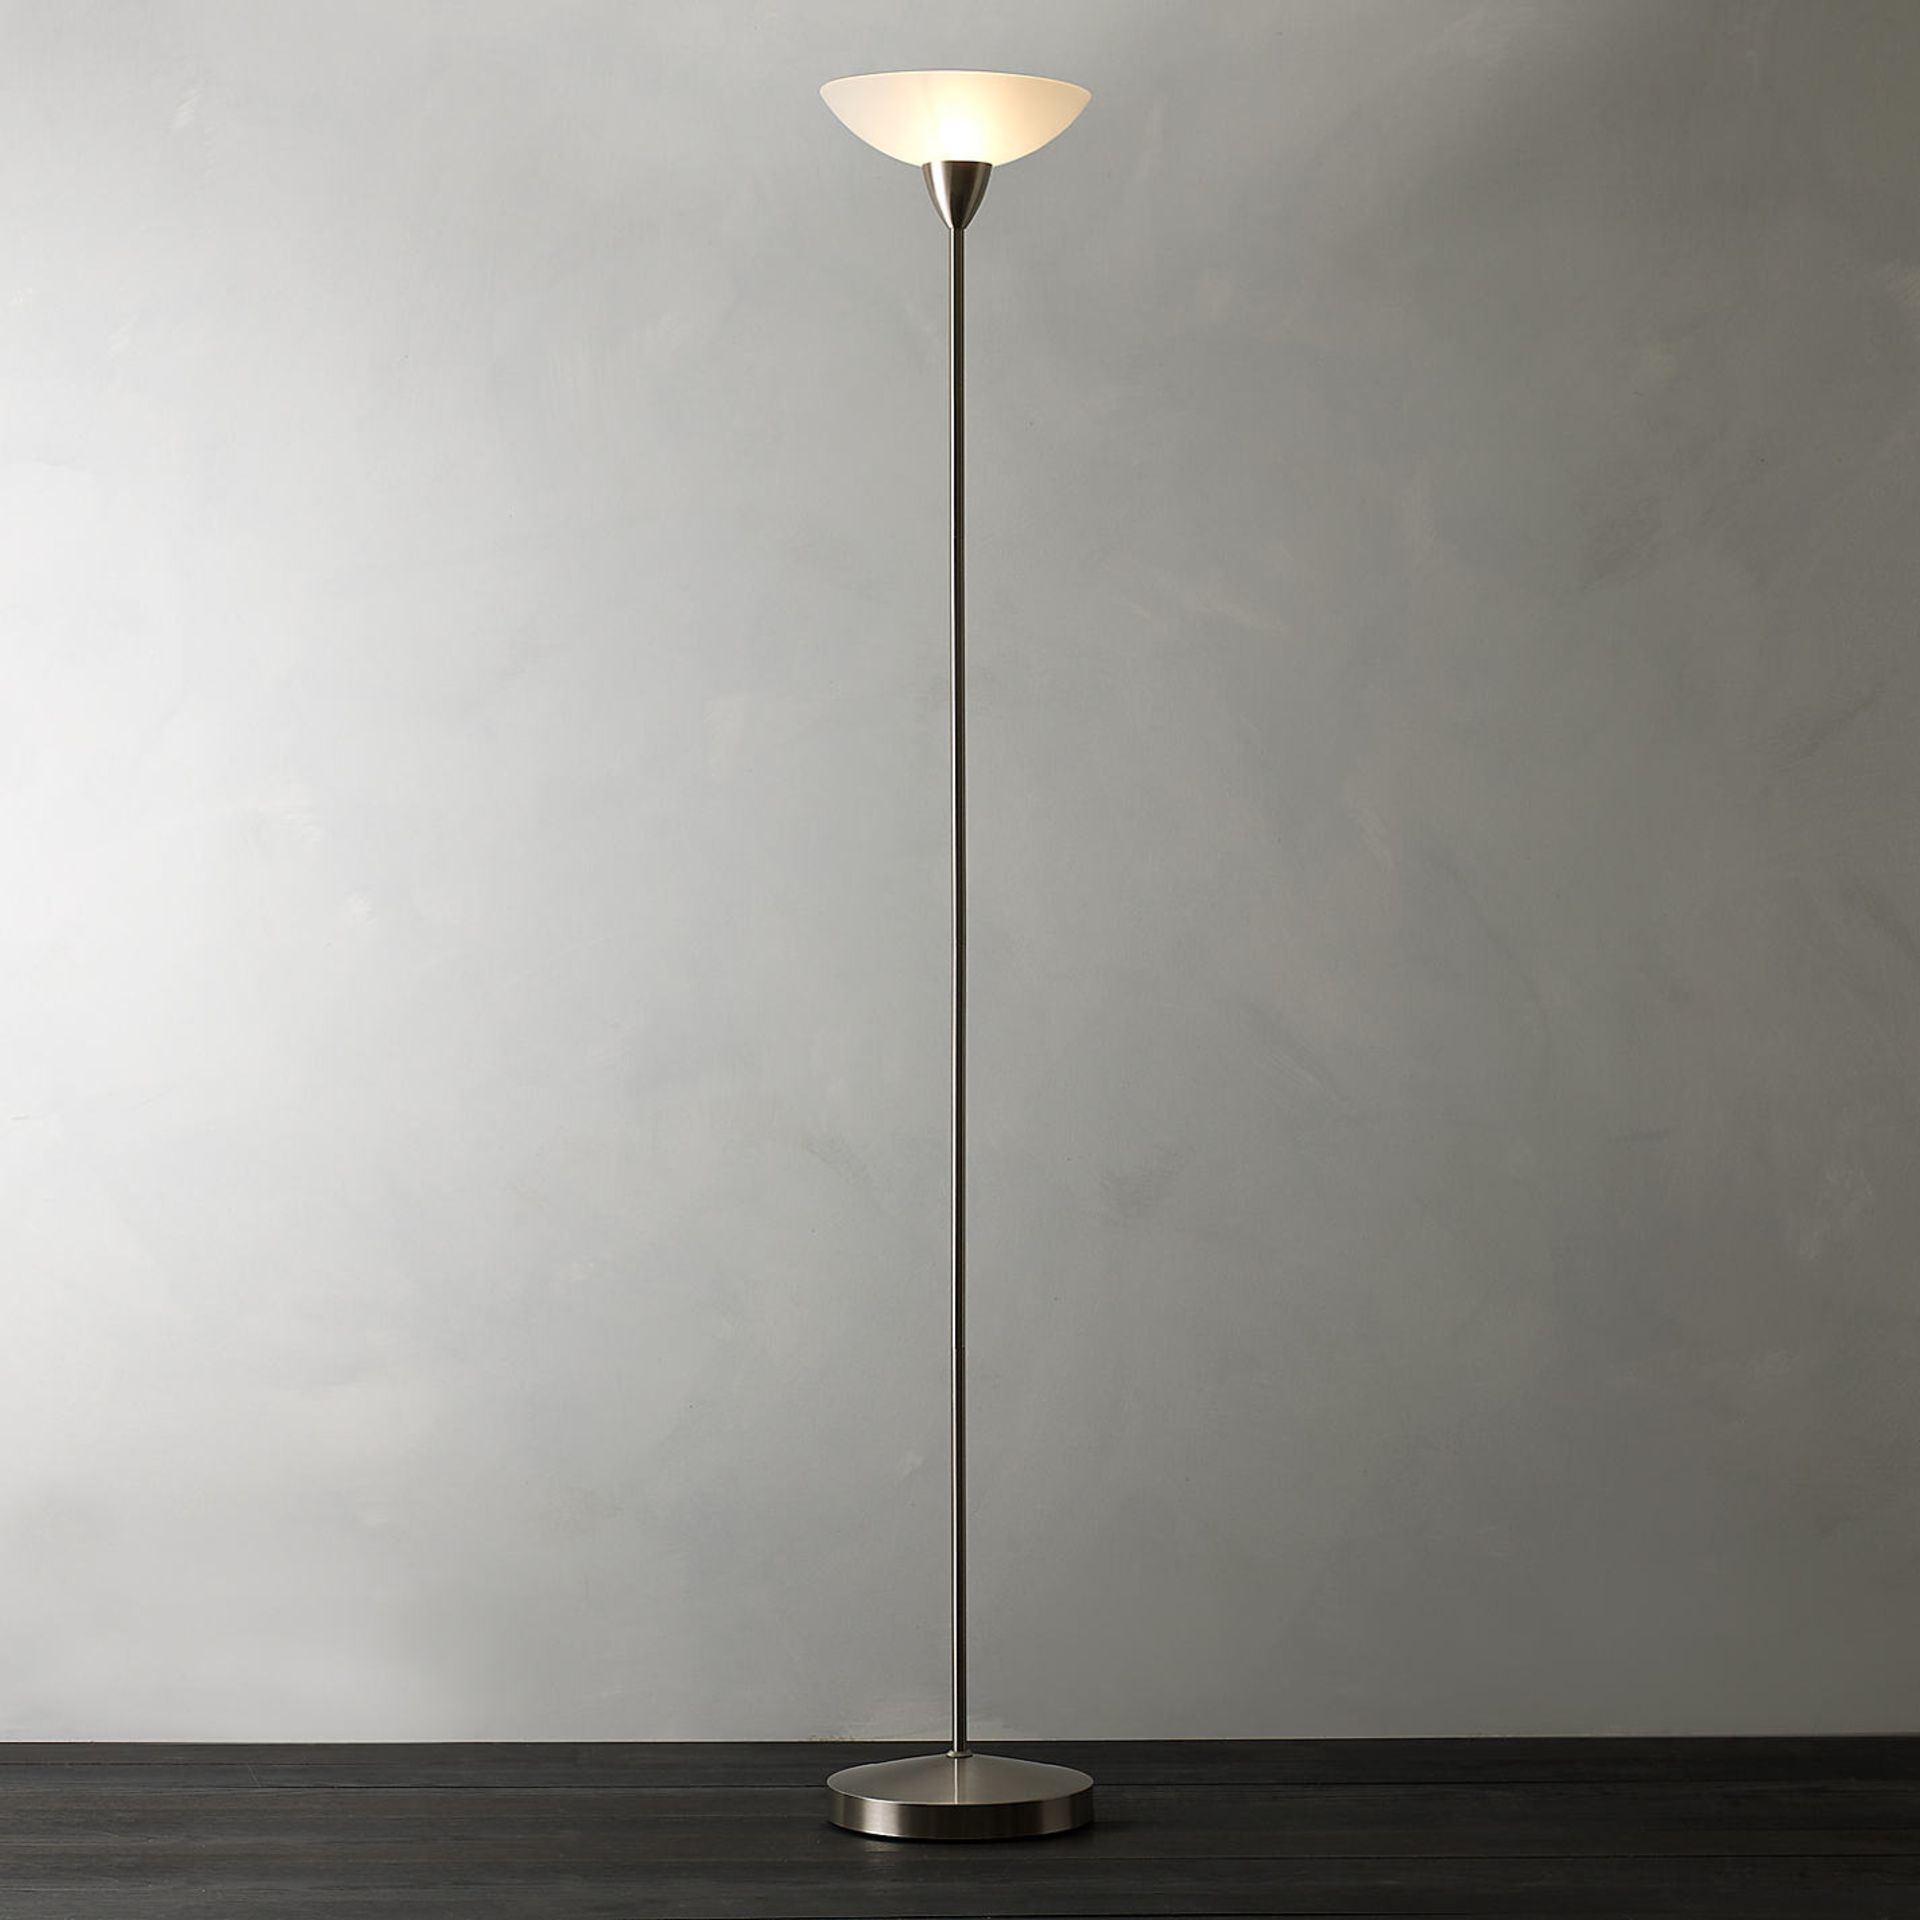 1 x BOXED DARLINGTON FLOOR LAMP BRUSHED CHROME FINISH BASE RRP £50 (16.10.17) *PLEASE NOTE THAT